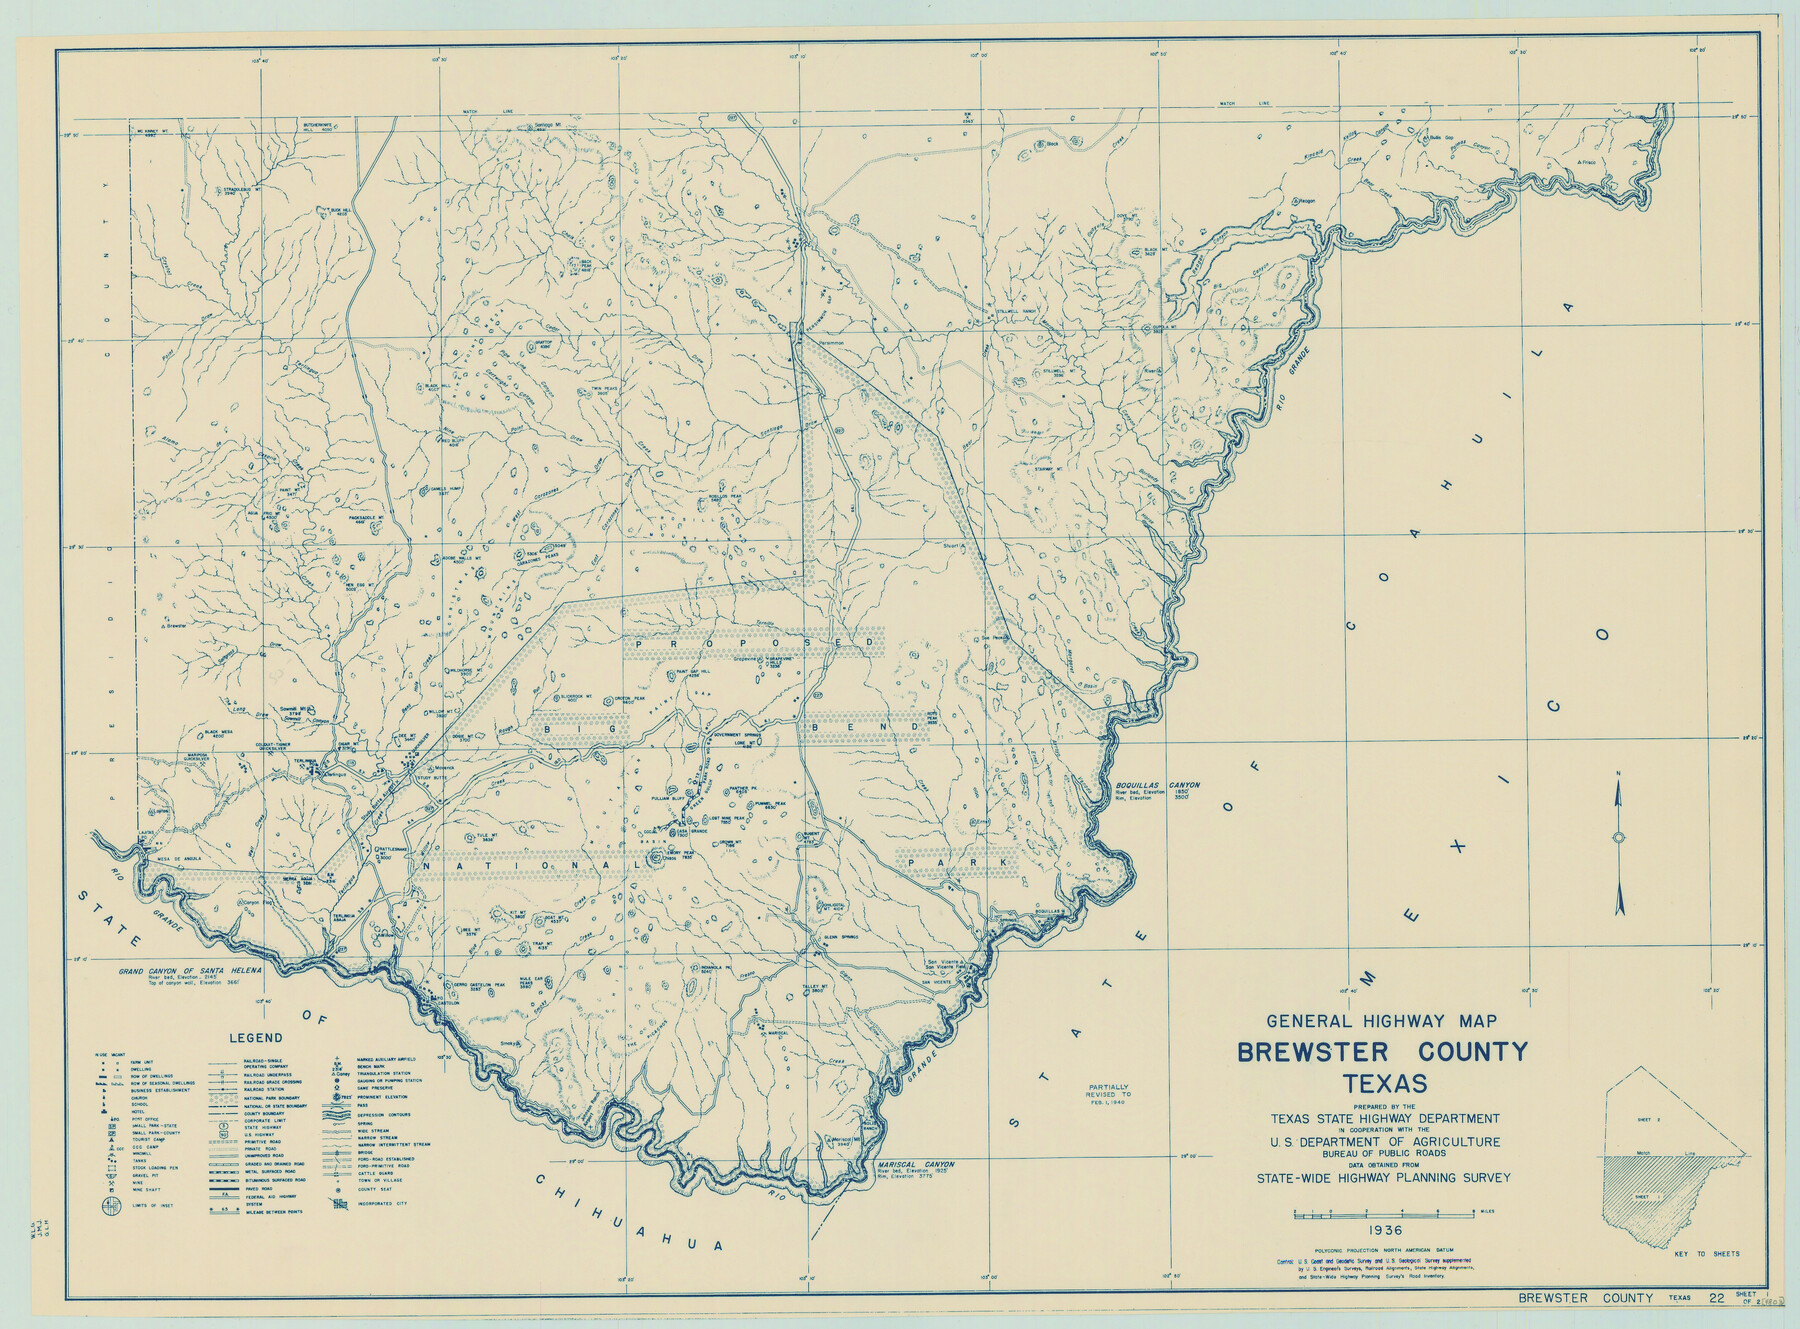 79028, General Highway Map, Brewster County, Texas, Texas State Library and Archives